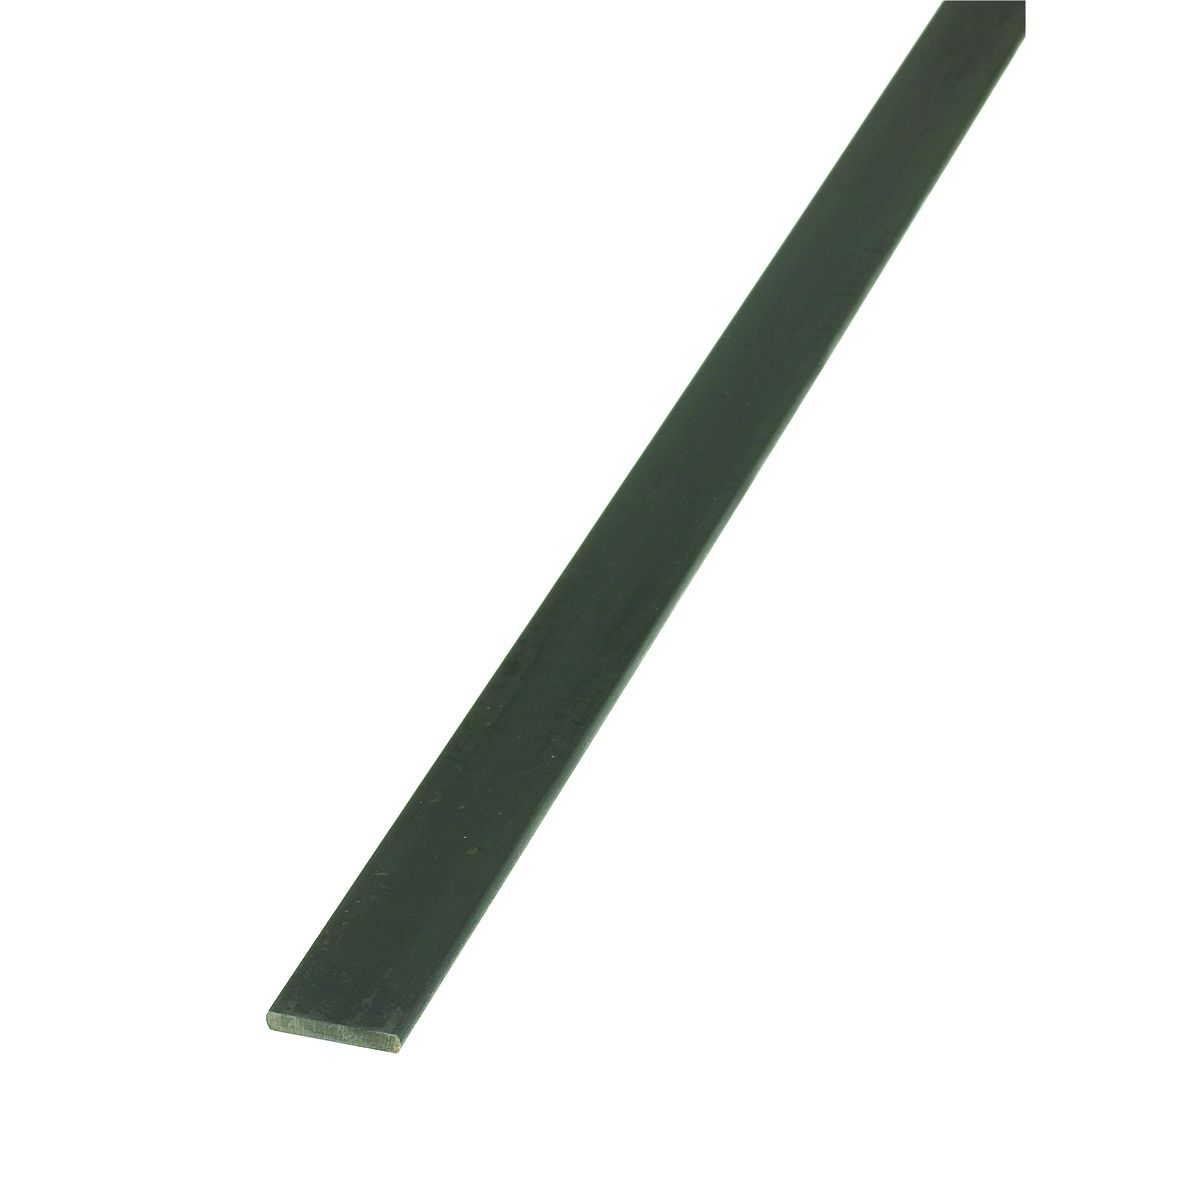 Image of Wickes Multi-Purpose Flat Steel Bar - 1m Length / 6mm Thickness